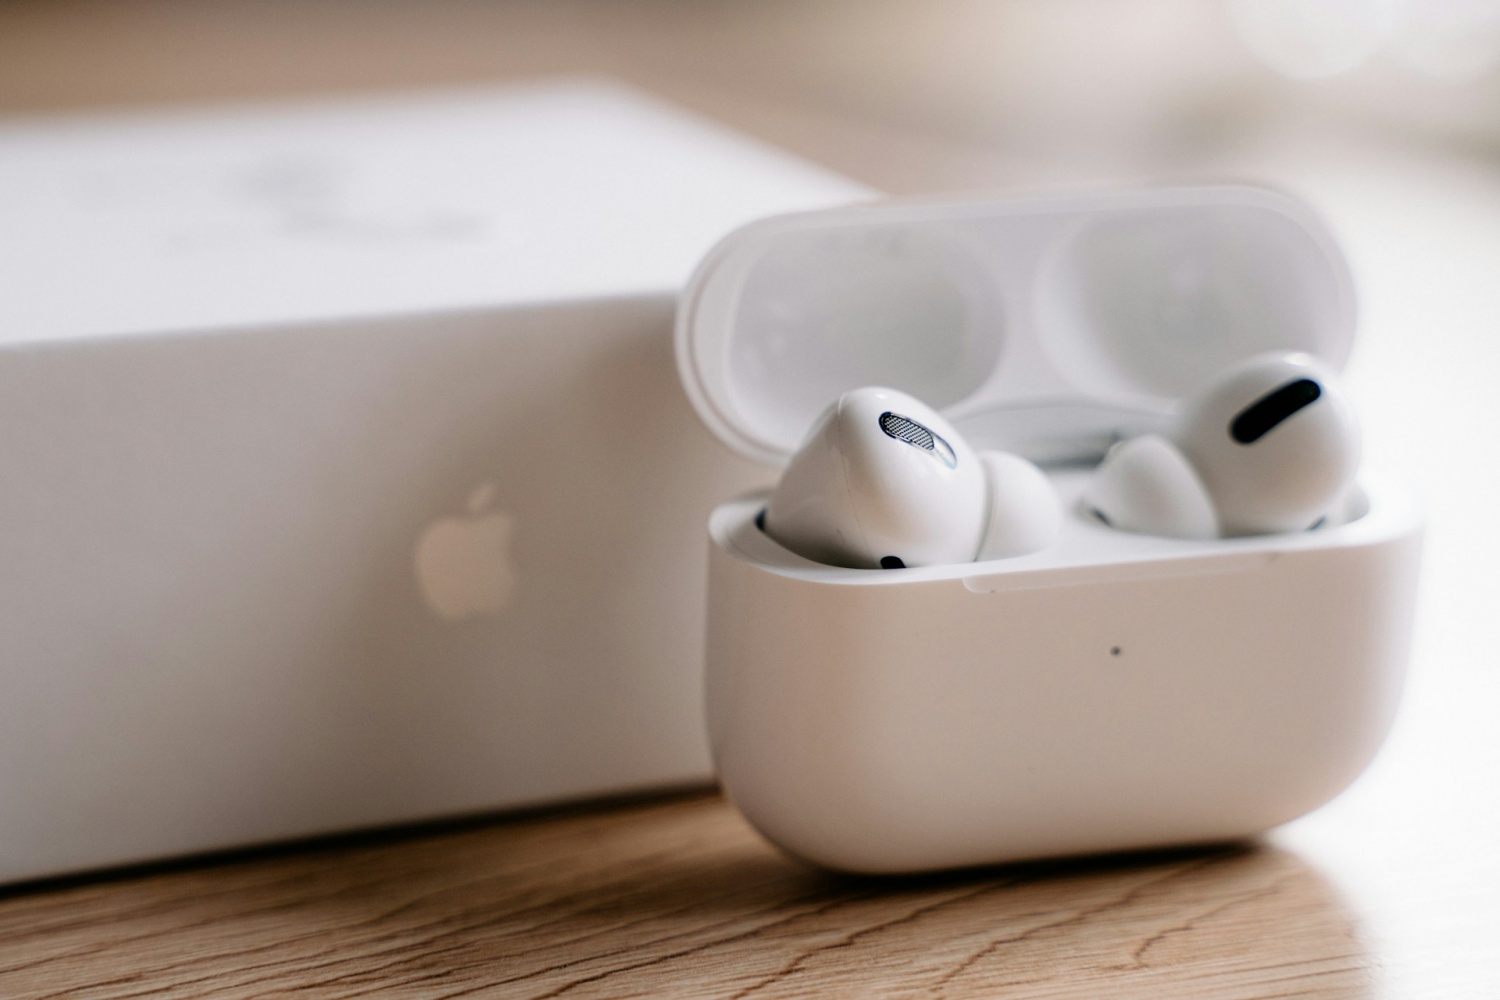 New AirPods Pro Features For iOS 18 to Include Hearing Aid Mode, Voice Isolation, and More